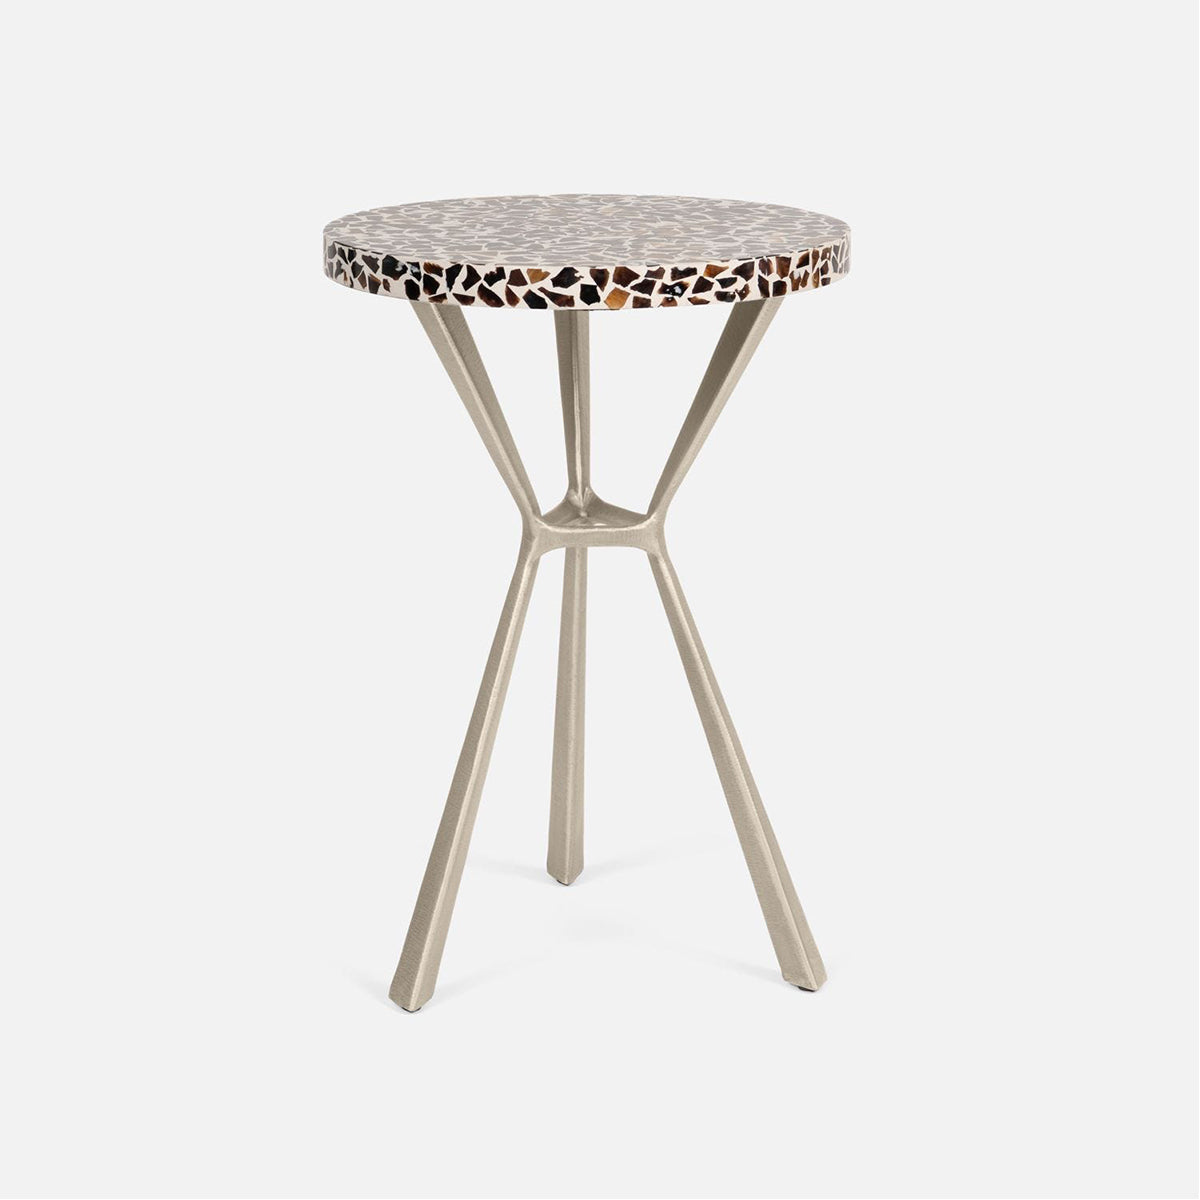 Made Goods Paislee Iron Tripod Side Table in Pen Shell/Resin